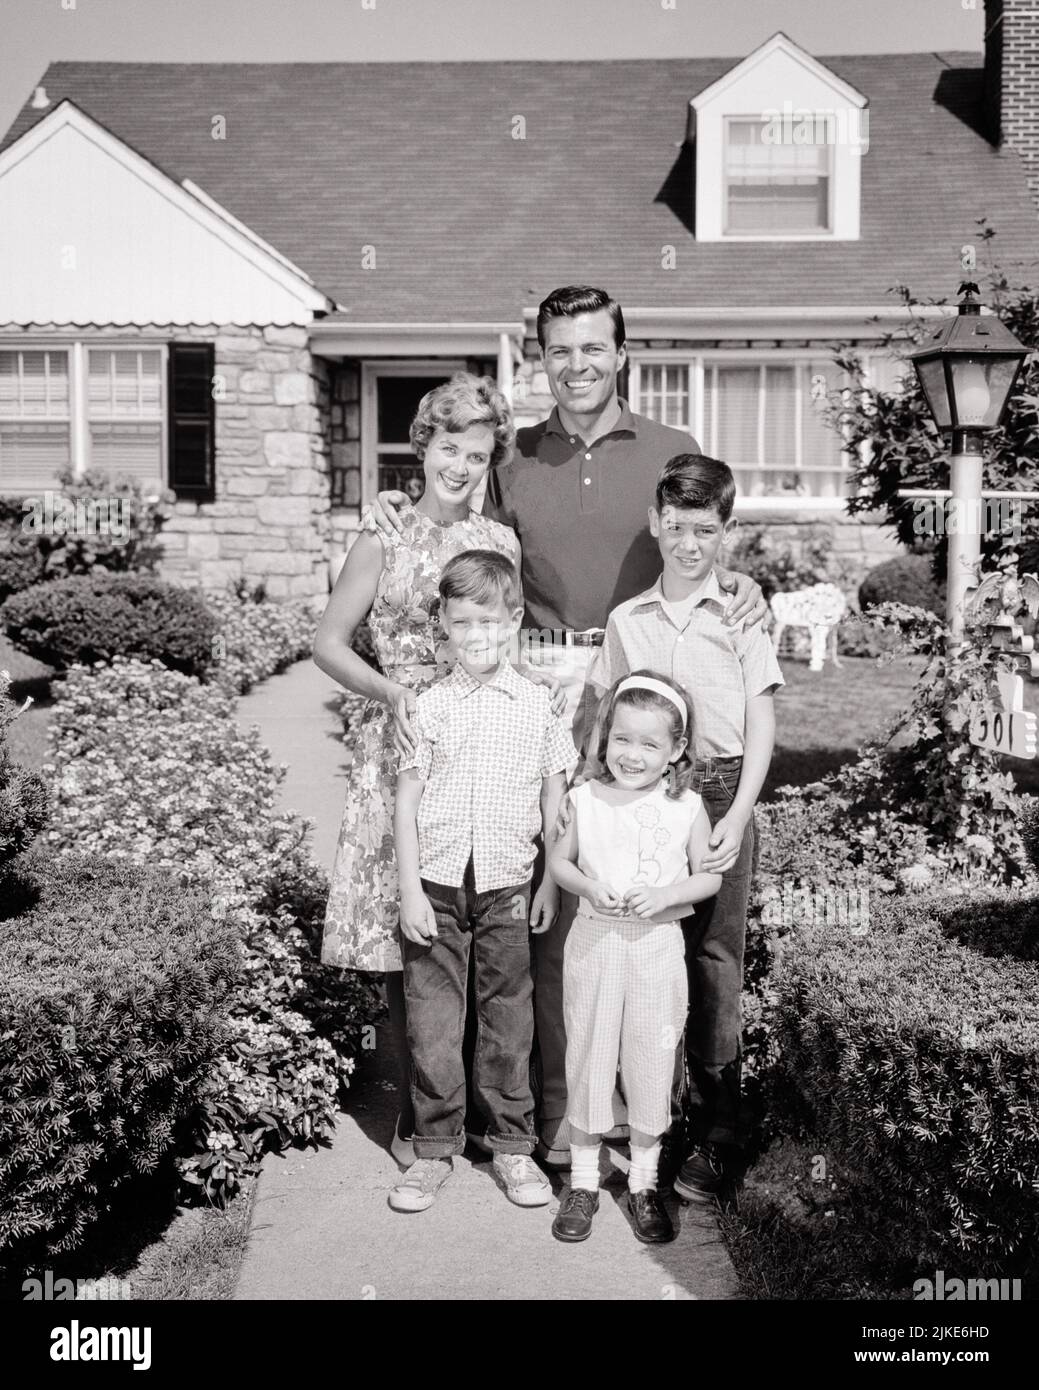 1960s PORTRAIT OF SMILING FAMILY OF FIVE STANDING IN FRONT OF THEIR SUBURBAN HOUSE MOTHER FATHER WITH TWO BOYS AND A GIRL - j11124 HAR001 HARS MOTHERS OLD TIME FUTURE NOSTALGIA BROTHER OLD FASHION SISTER 1 JUVENILE BALANCE STRONG SONS PLEASED FAMILIES JOY LIFESTYLE FIVE CELEBRATION FEMALES HOUSES MARRIED 5 BROTHERS SPOUSE HUSBANDS HOME LIFE COPY SPACE FULL-LENGTH LADIES DAUGHTERS PERSONS RESIDENTIAL CARING MALES BUILDINGS SIBLINGS SPIRITUALITY CONFIDENCE SISTERS FATHERS B&W PARTNER EYE CONTACT SUCCESS HAPPINESS CHEERFUL STRENGTH DADS PROGRESS PRIDE AUTHORITY HOMES SIBLING SMILES CONNECTION Stock Photo